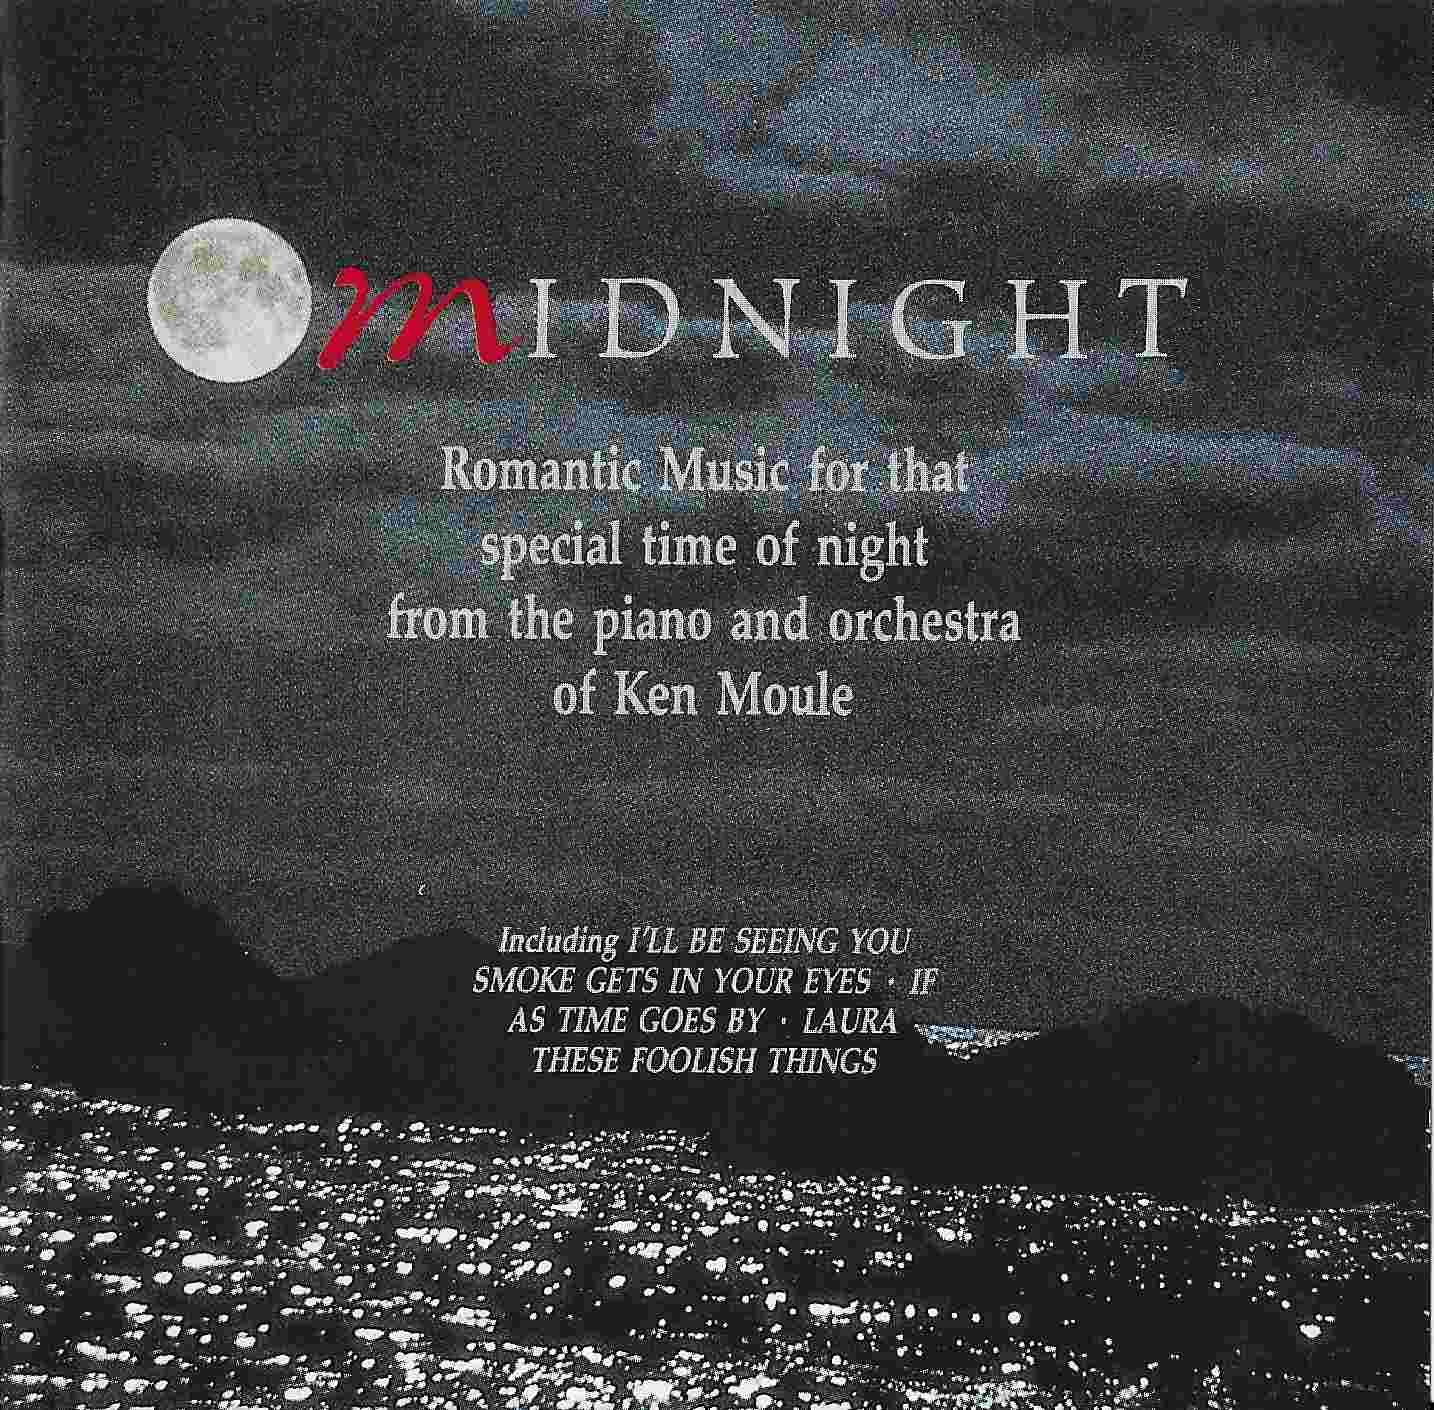 Picture of Midnight by artist Ken Moule from the BBC cds - Records and Tapes library